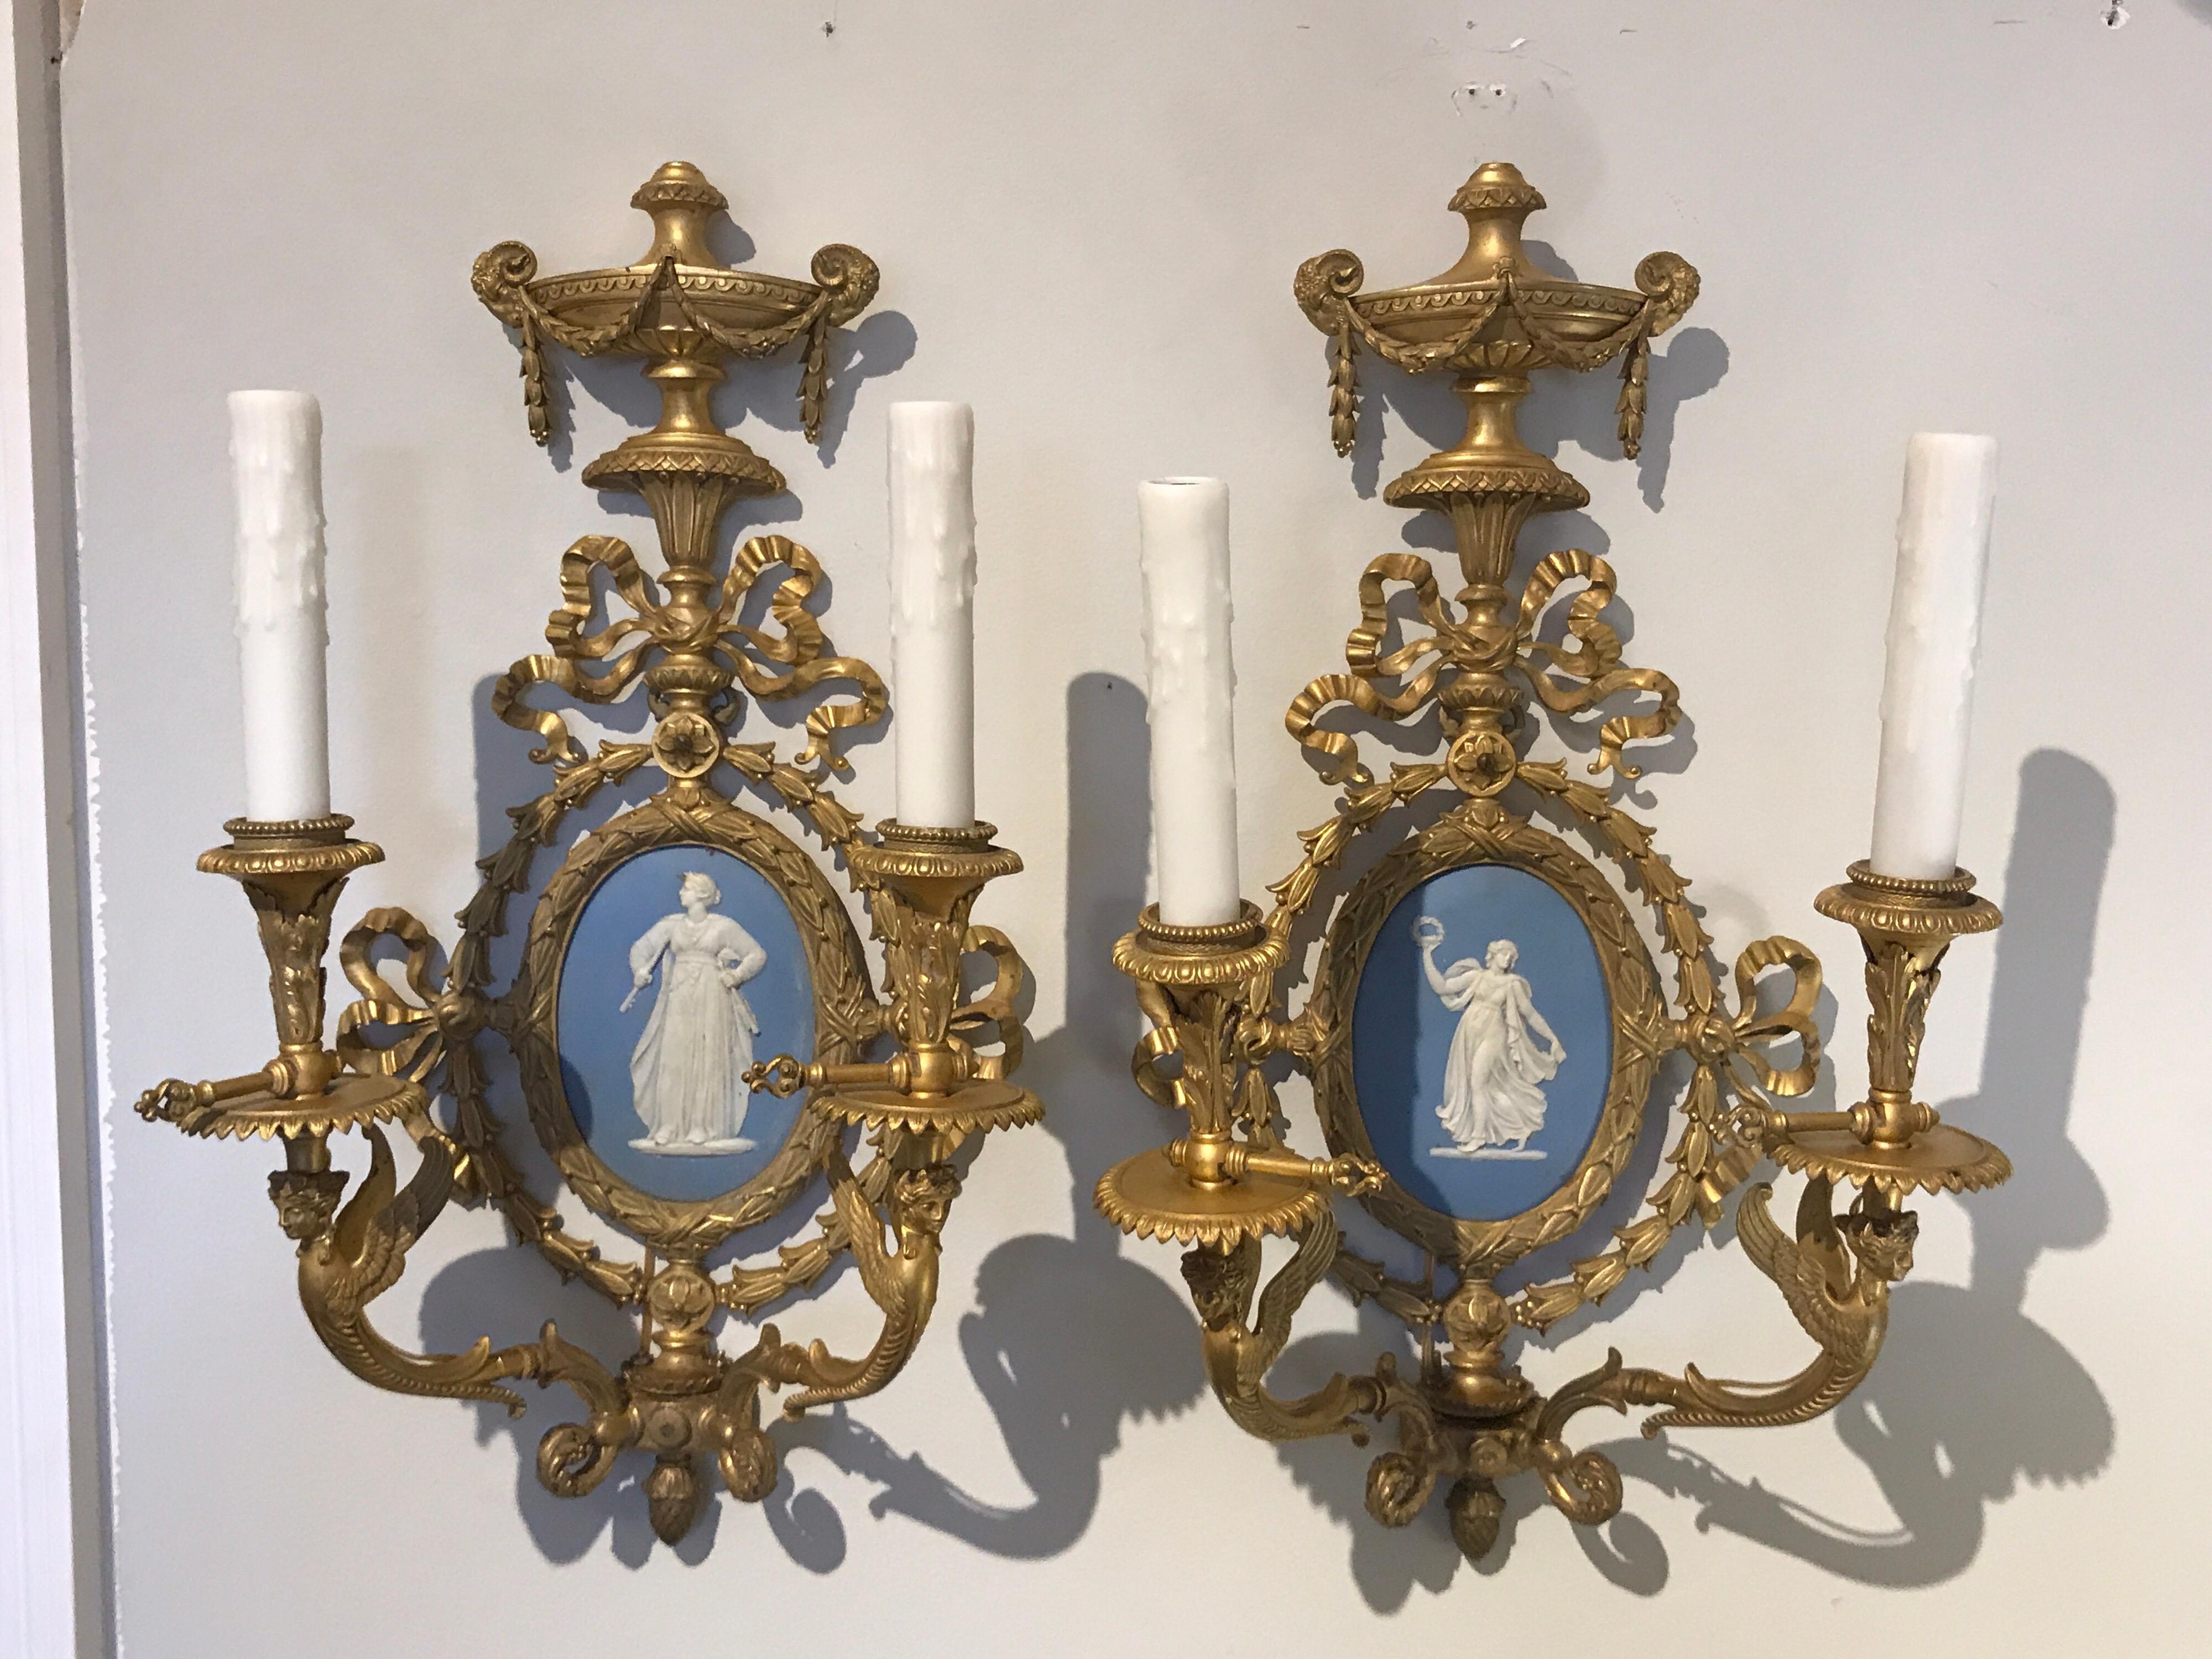 European Pair of Exquisite Adam Style Ormolu Wall Sconces with Wedgwood Plaques